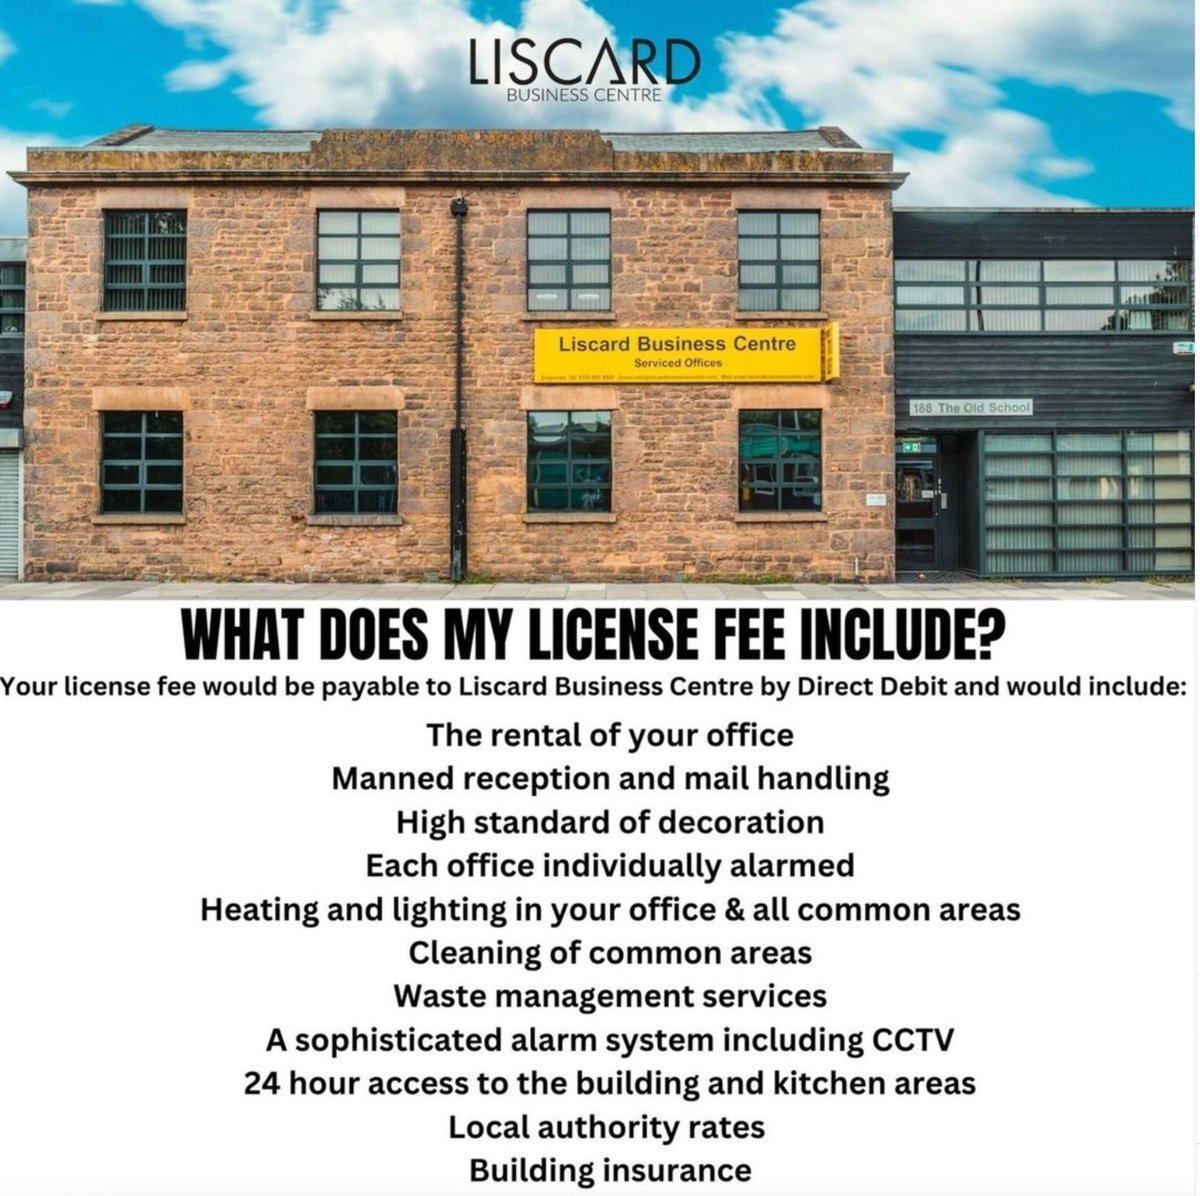 We have everything covered here at LBC.

#officespace #offices #wallasey #newbrighton #Westkirby #liverpool #northwest #entrepreneur #newbusiness #b2b #merseyside #wirral #localbusiness #localspace #teamwork #officelife